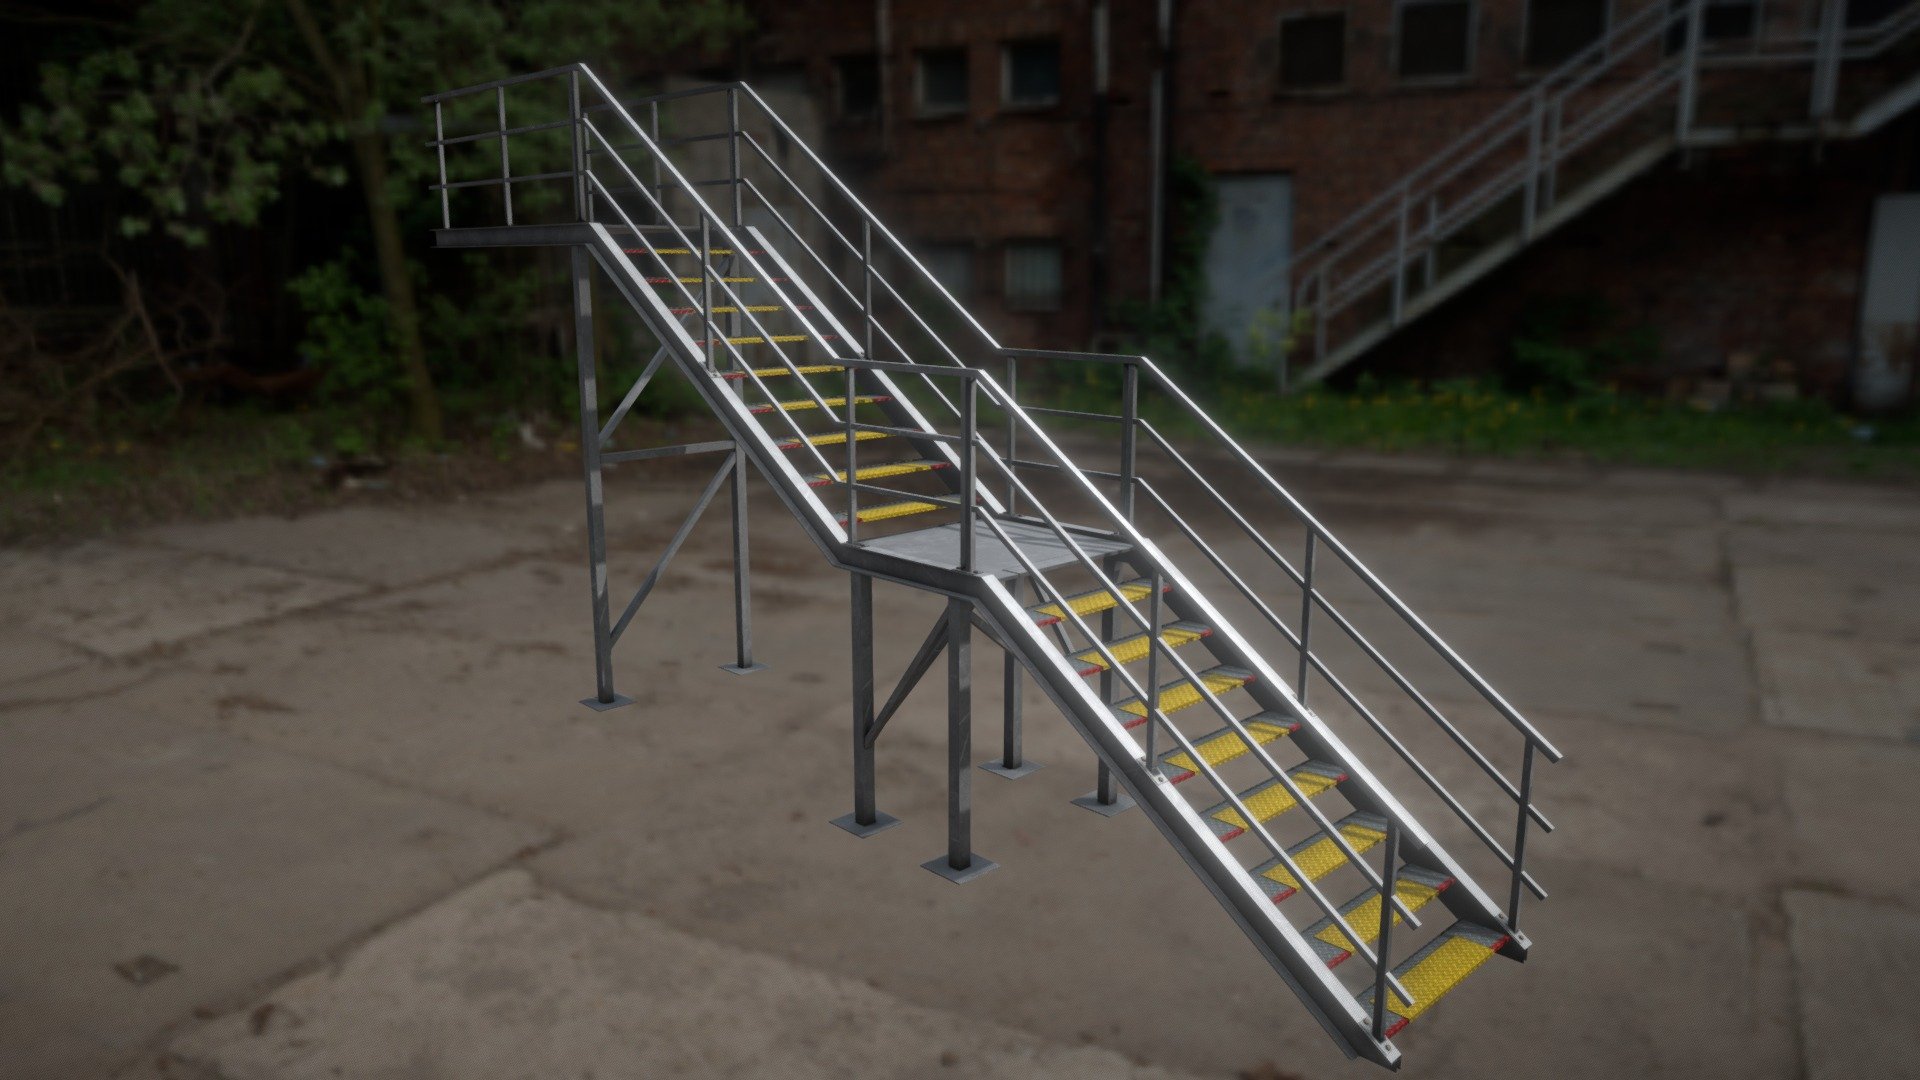 Here is a properly modeled low poly Industrial Metal Stairs with Rails, mostly used outdoors, perfectly unwrapped mapped and textured with substance painter and photoshop.
Smoothing groups and shading is well done 3d model